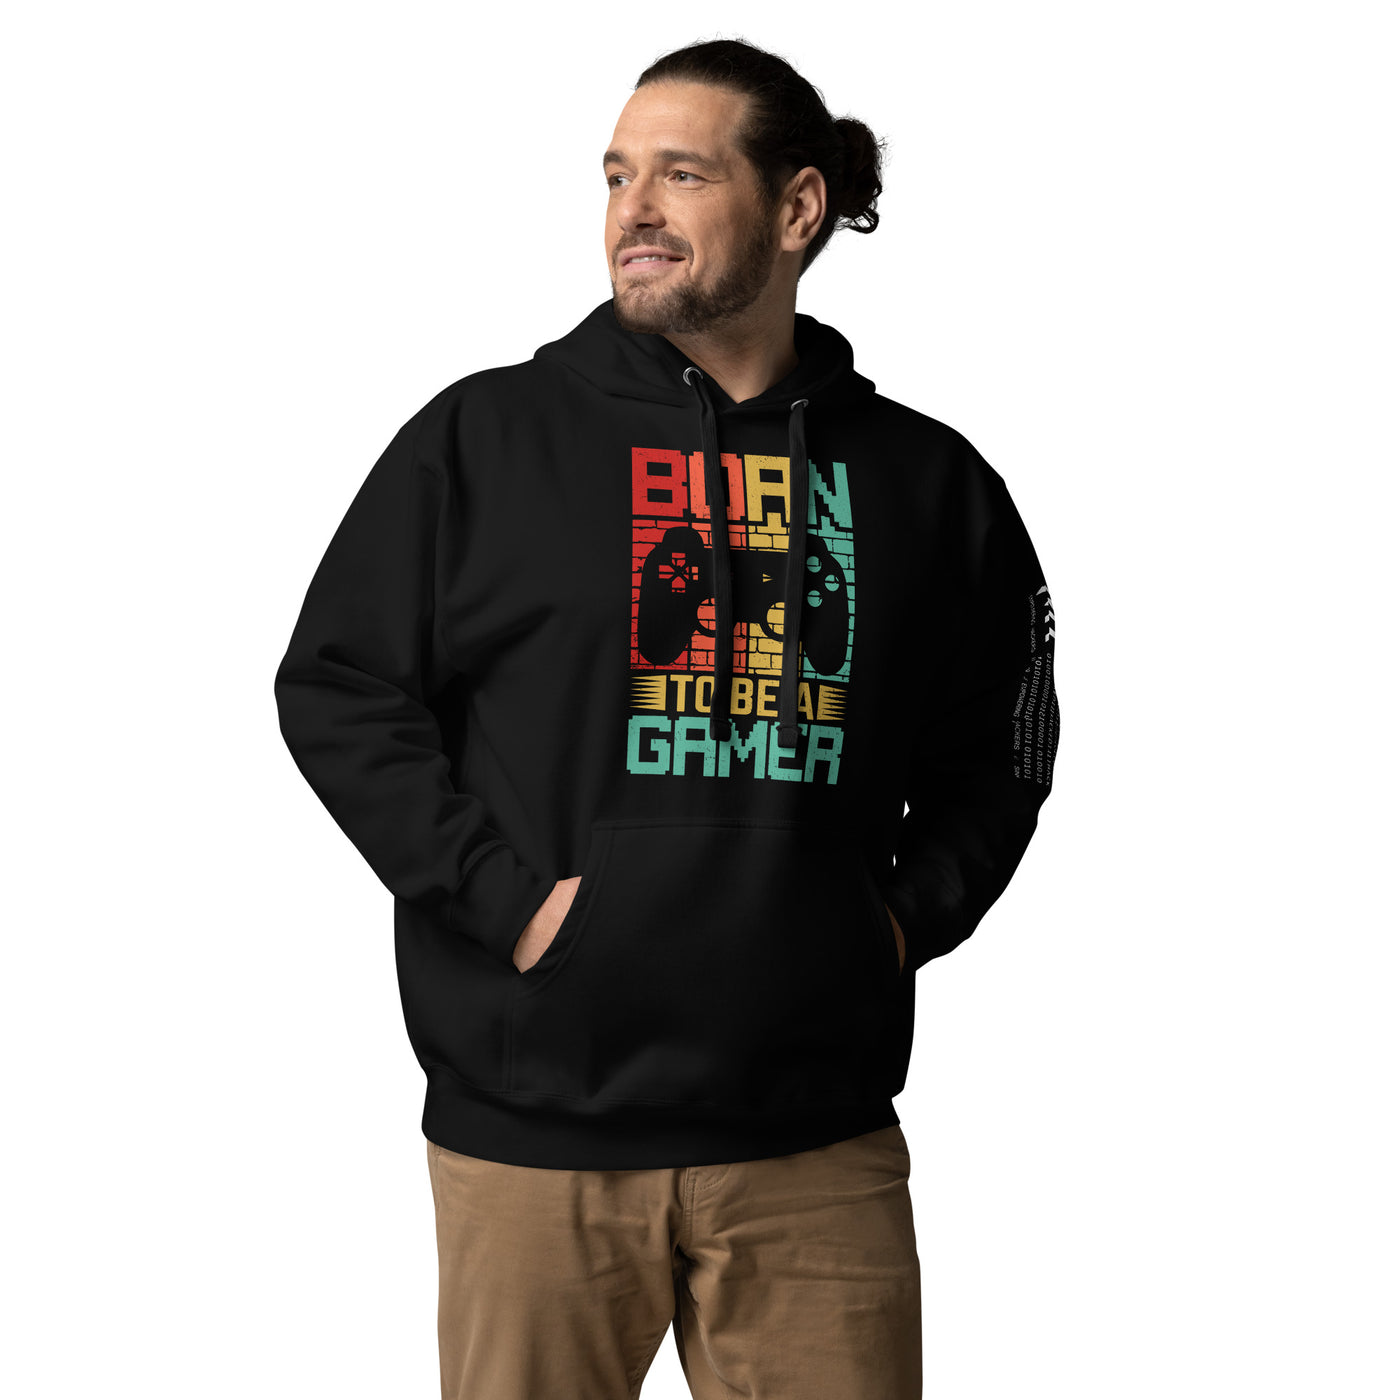 Born to Be a Gamer - Shagor Unisex Hoodie